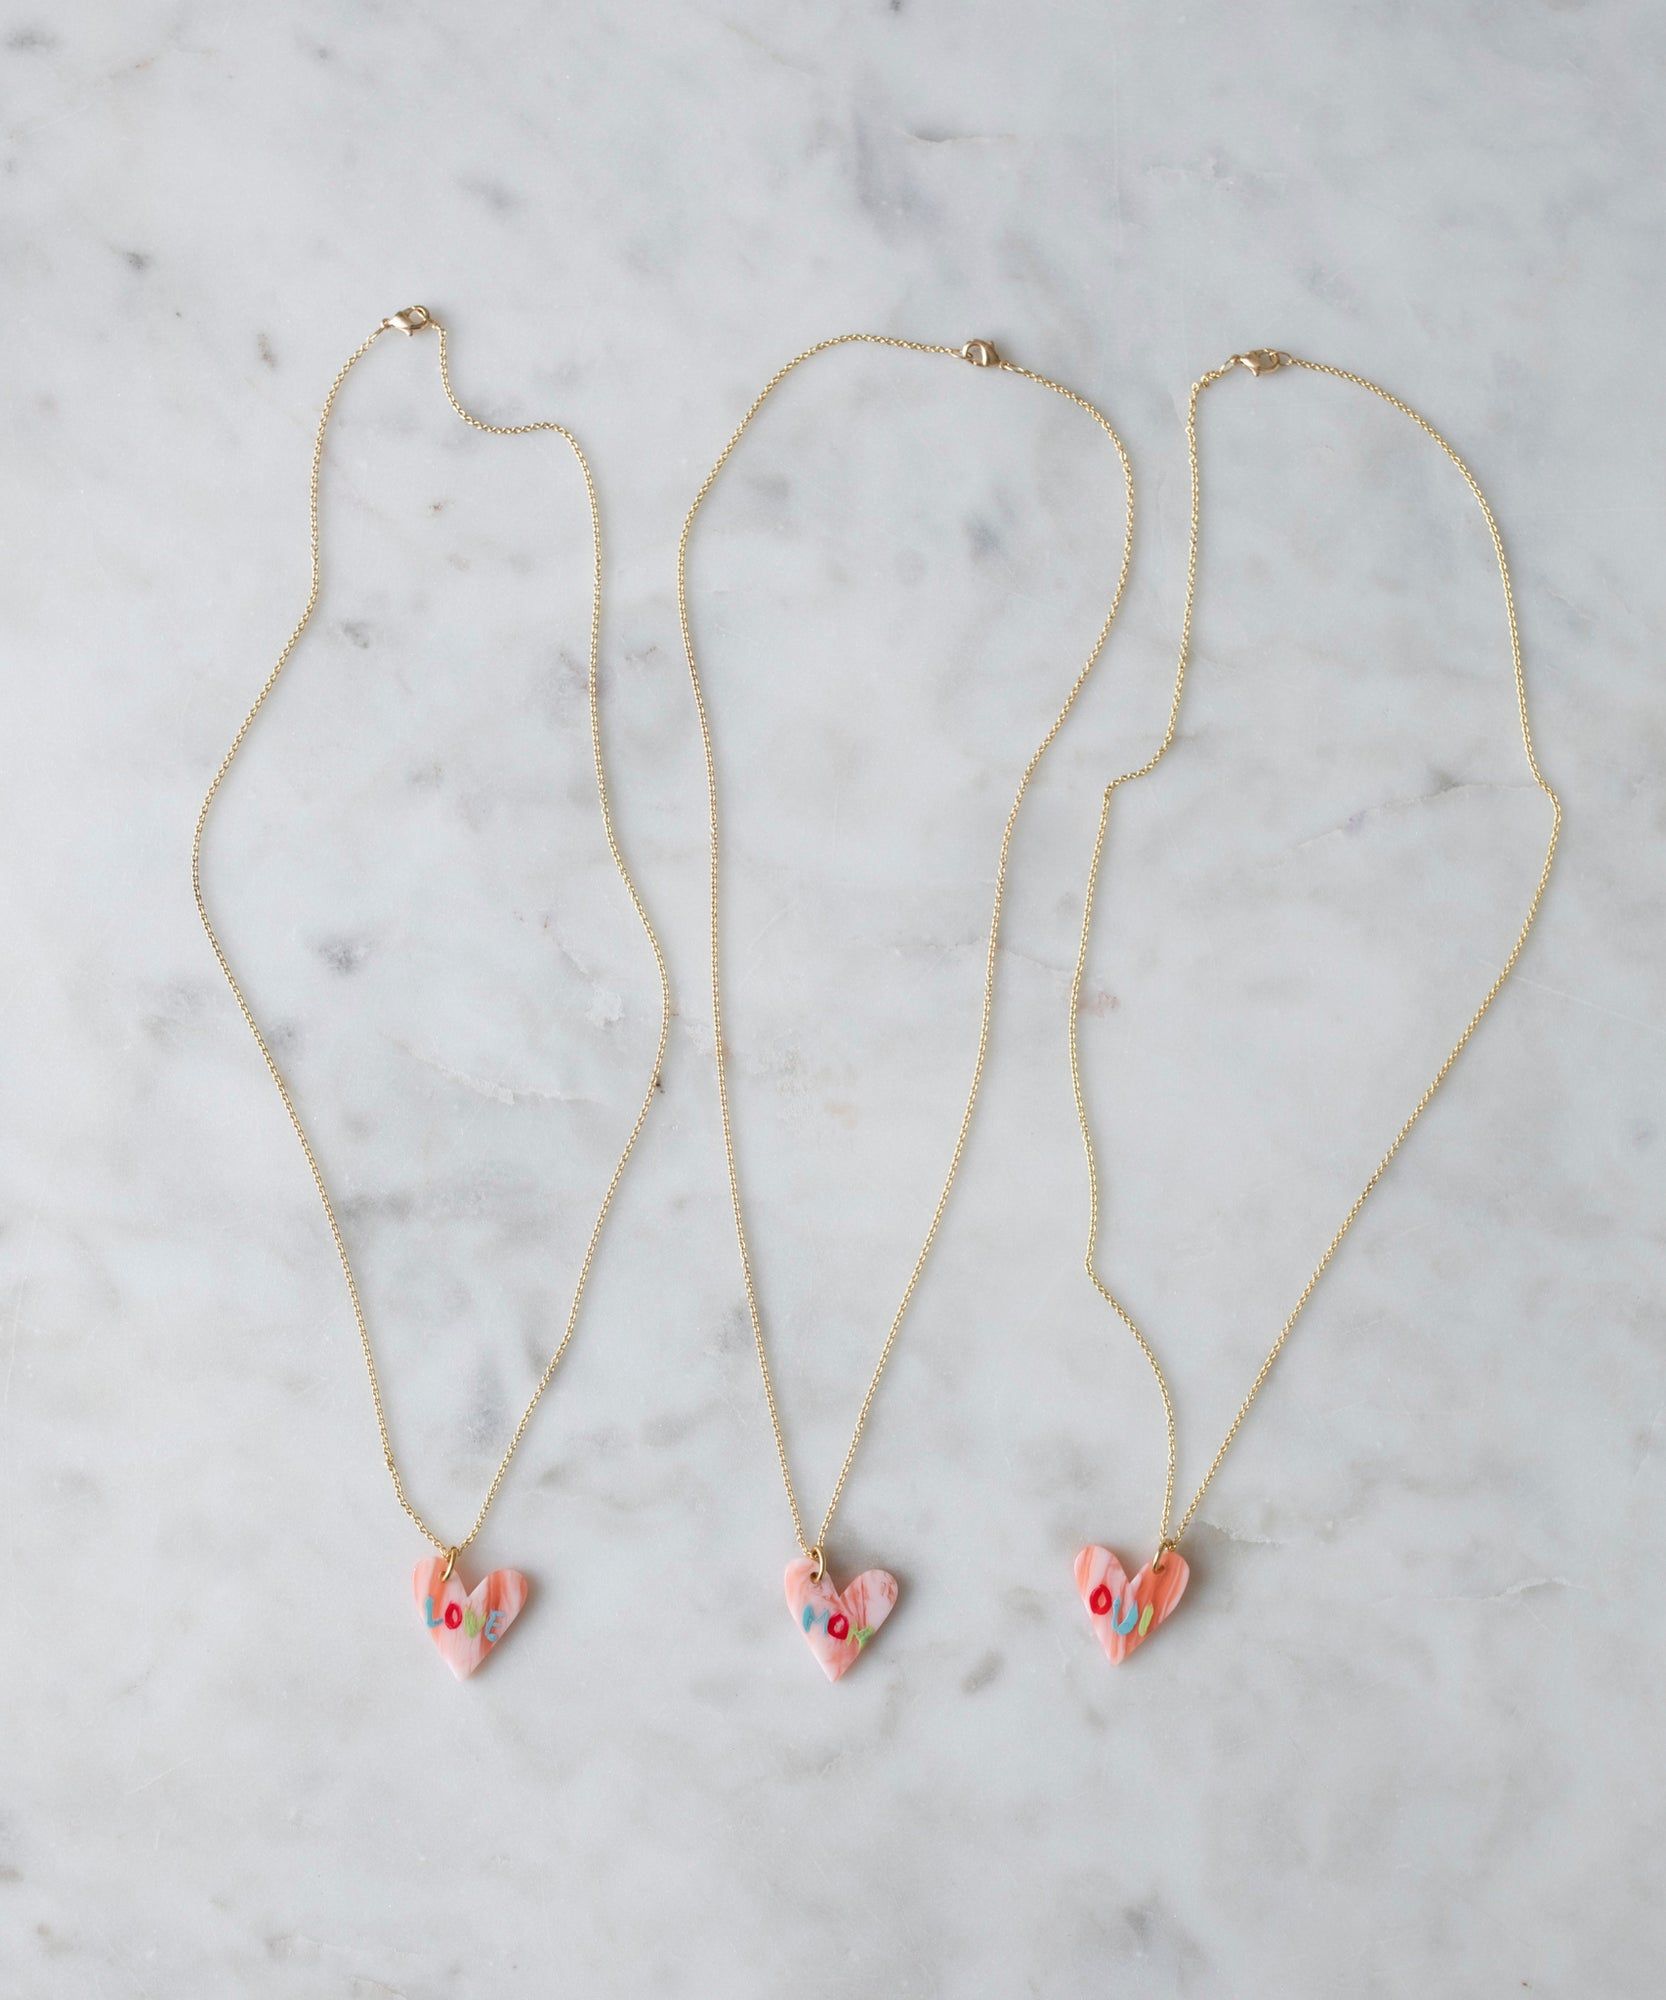 Three Pledges Of Tenderness LOVE Necklaces by WALD Berlin with eye motifs, made in Germany, displayed on a marble surface.